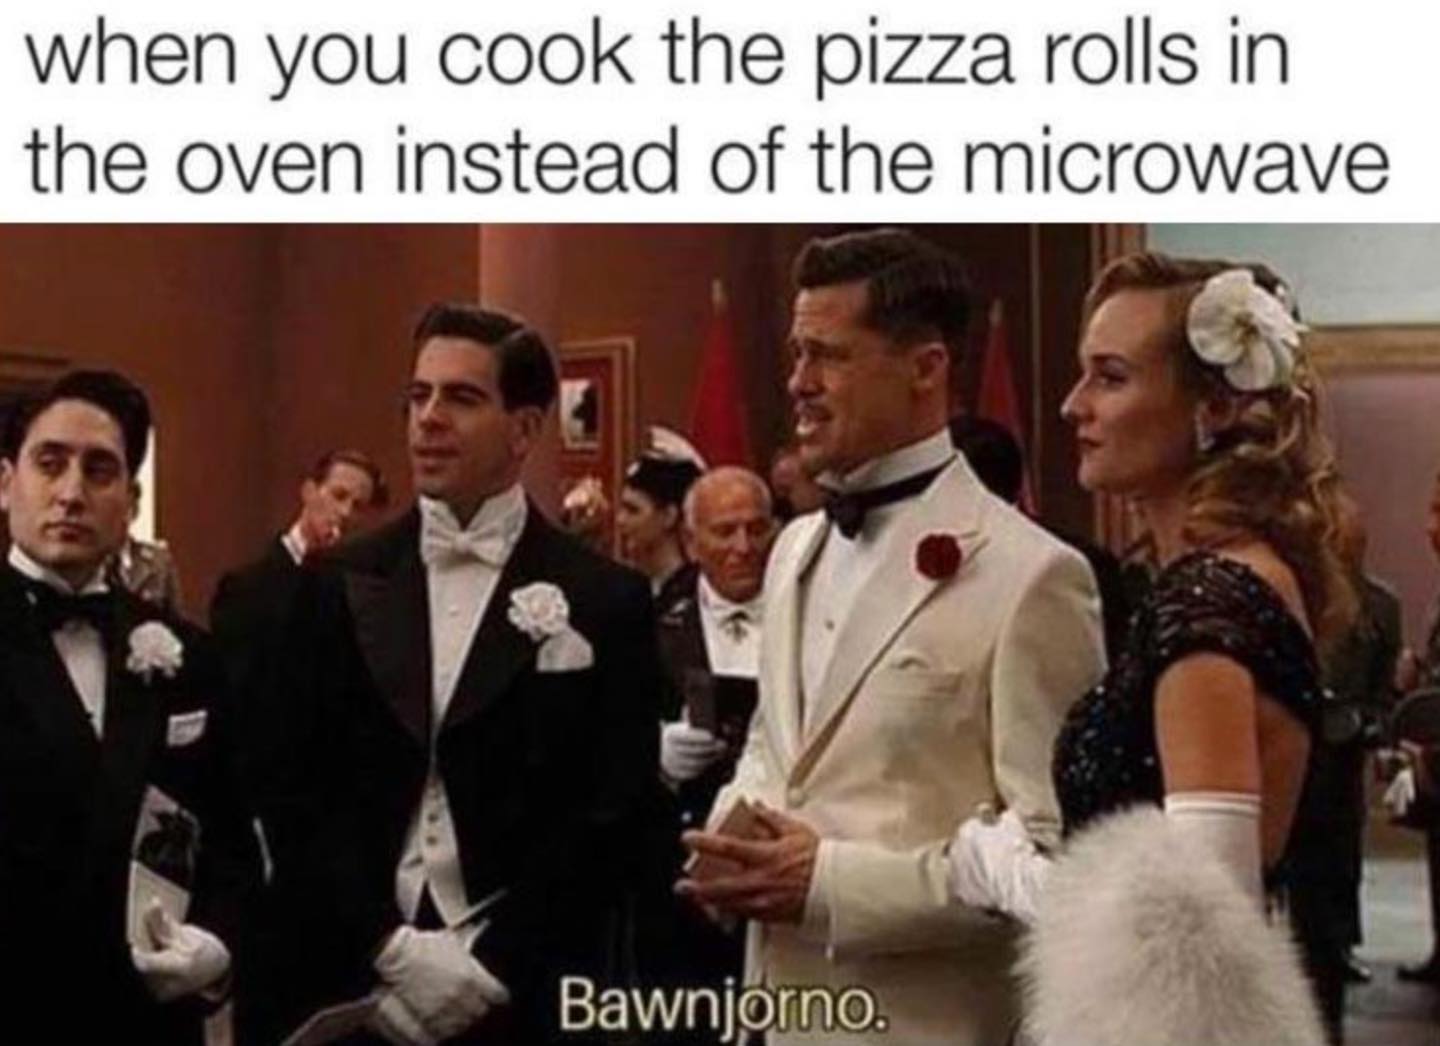 you cook pizza rolls in the oven - when you cook the pizza rolls in the oven instead of the microwave Bawnjorno.